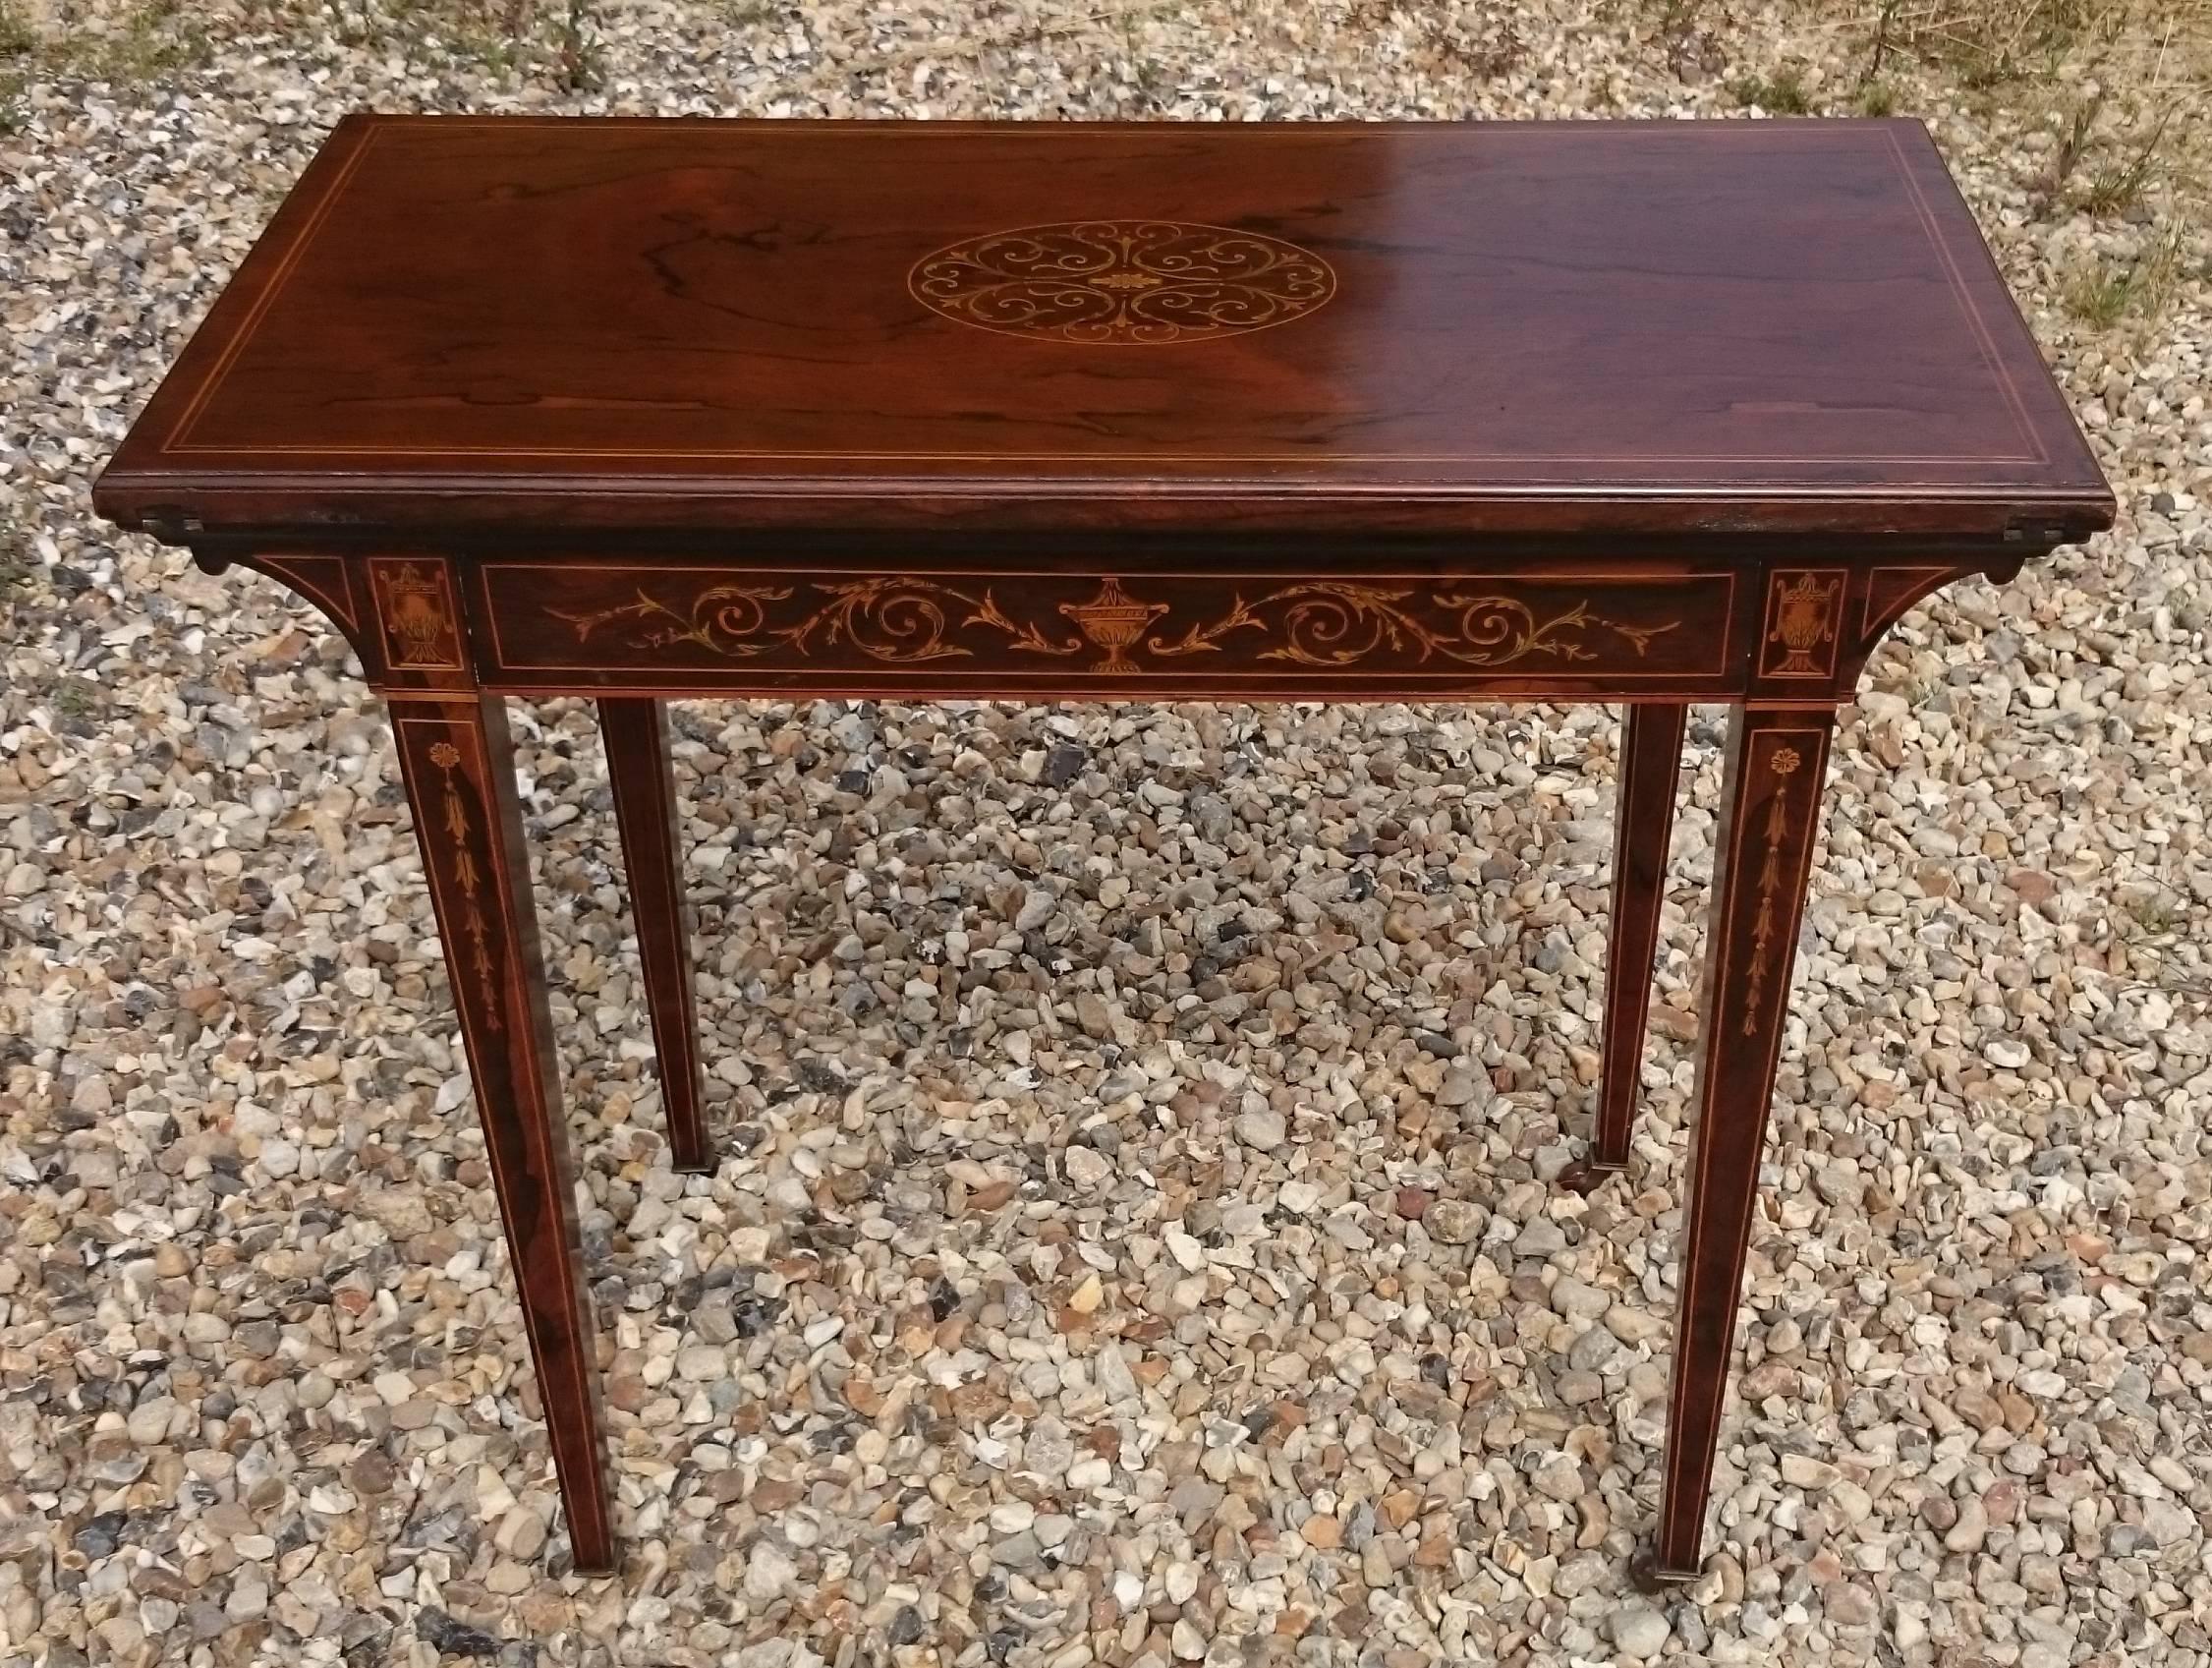 Very fine quality early 20th century antique card table with intricate box wood inlay. This card table is very well made, the construction methods and choice of timber are second to none and the inlay is very detailed. The top rotates through ninety